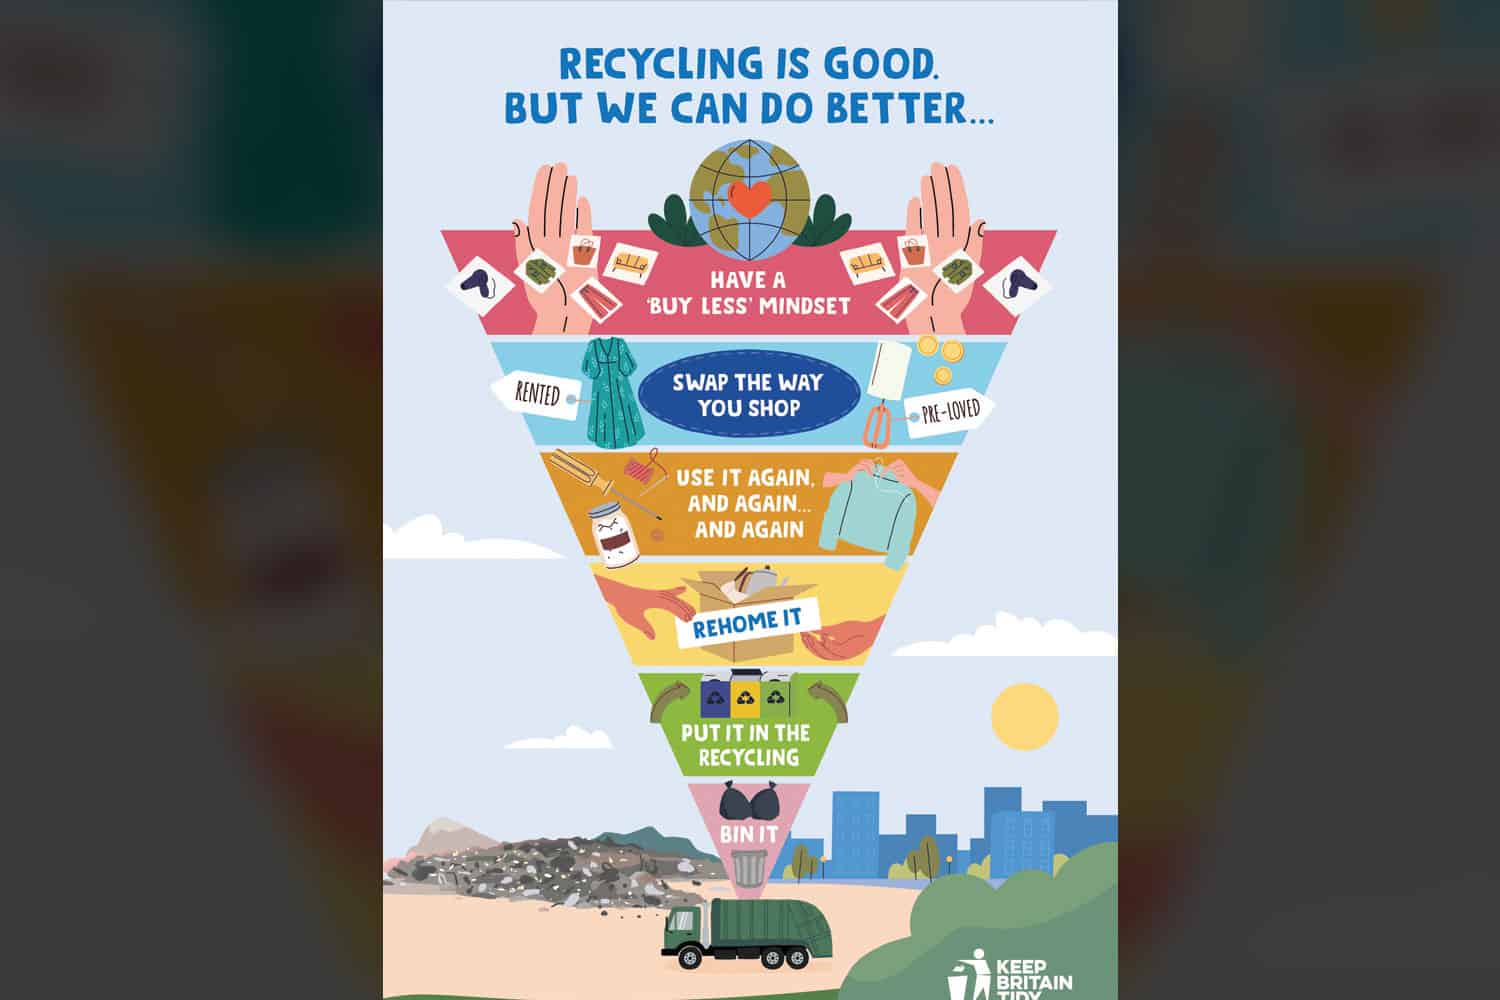 Keep Britain Tidy’s ‘hierarchy of waste’ graphic showing a triangle wide at the top and narrow at the bottom disappearing into a refuse truck on waste site; the triangle has words and images designed to encourage actions that reduce and reuse waste, with recycling and binning waste at the bottom.